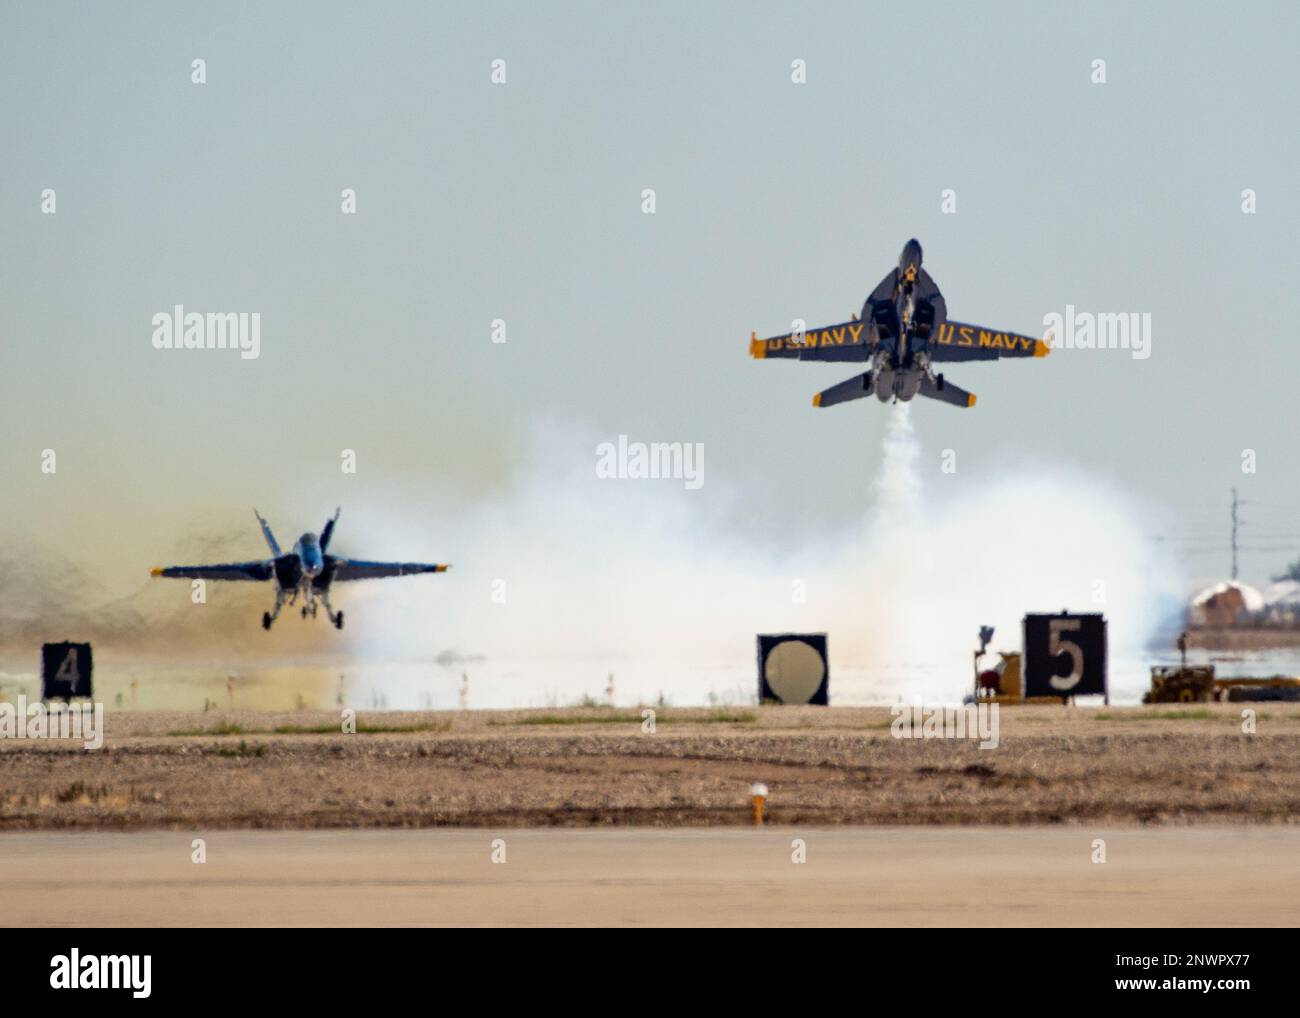 230122-N-TV337-1309 EL CENTRO, Calif. (Jan. 22, 2023) U.S. Navy Flight Demonstration Squadron, the Blue Angels, take off during a training flight over Naval Air Facility (NAF) El Centro. The Blue Angels are currently conducting winter training at NAF El Centro, California, in preparation for the upcoming 2023 air show season. Stock Photo